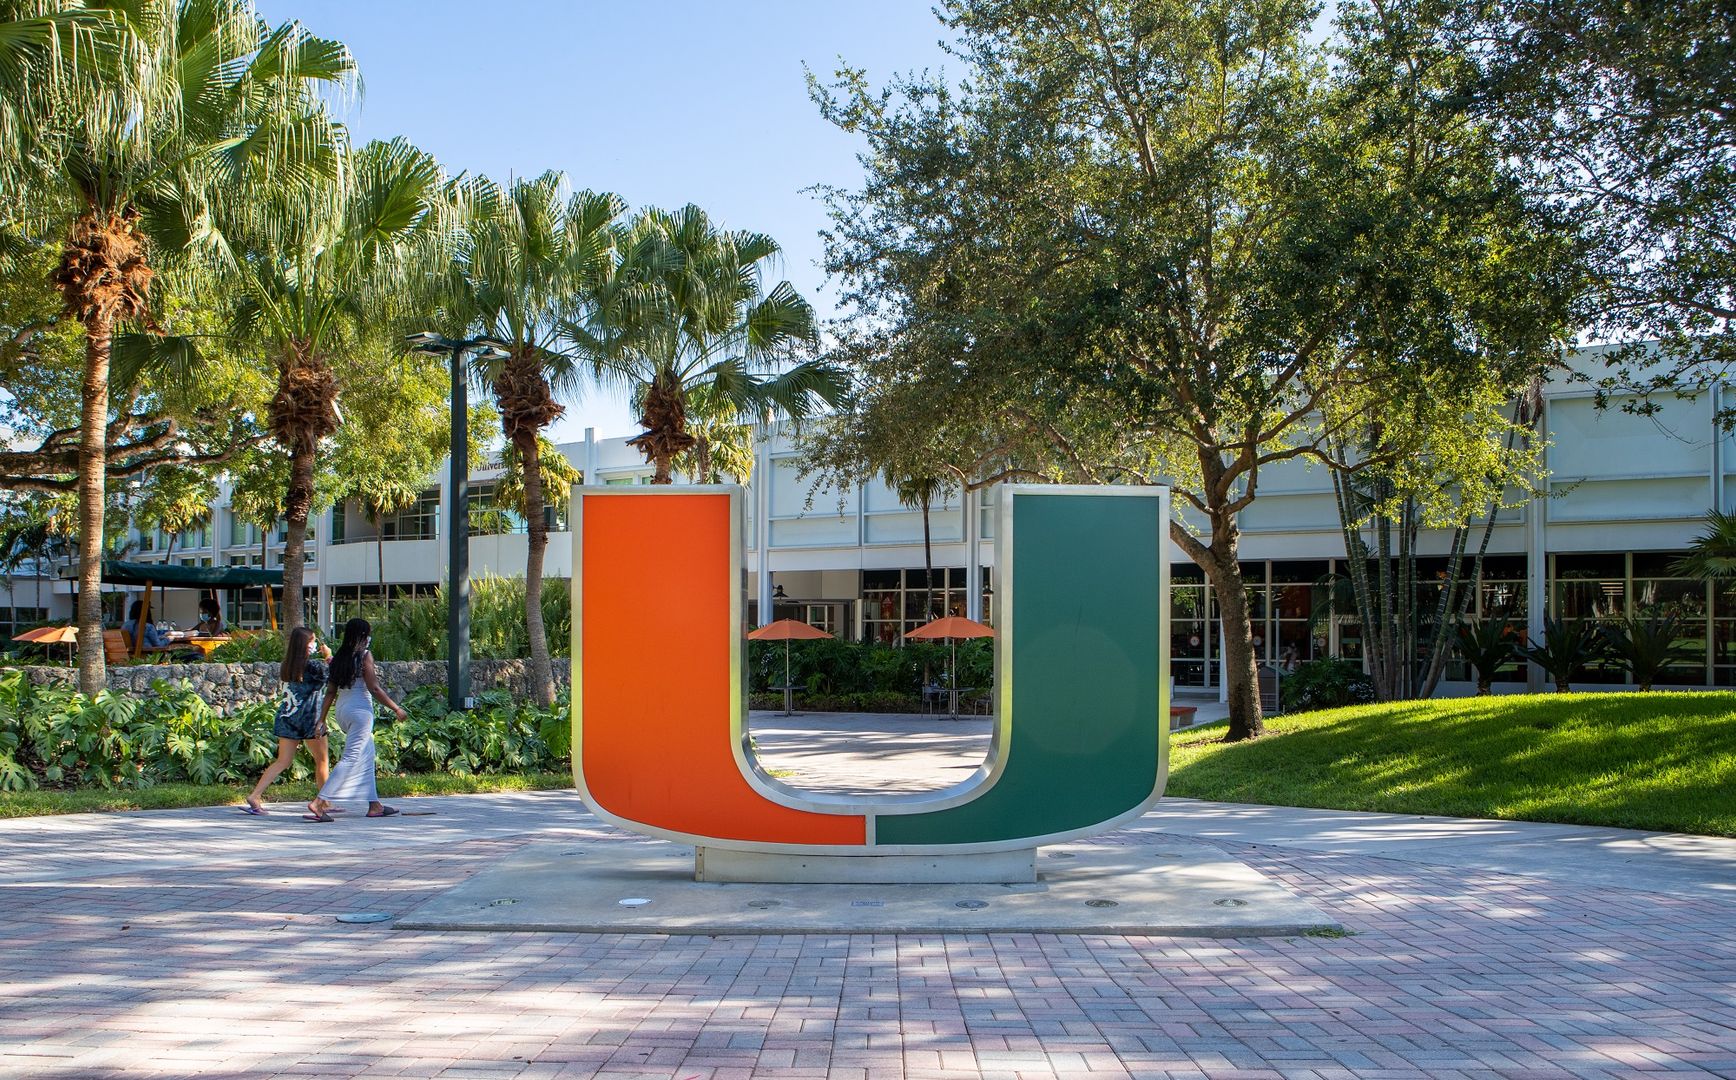 Miami Places 235 Student-Athletes on ACC Academic Honor Roll